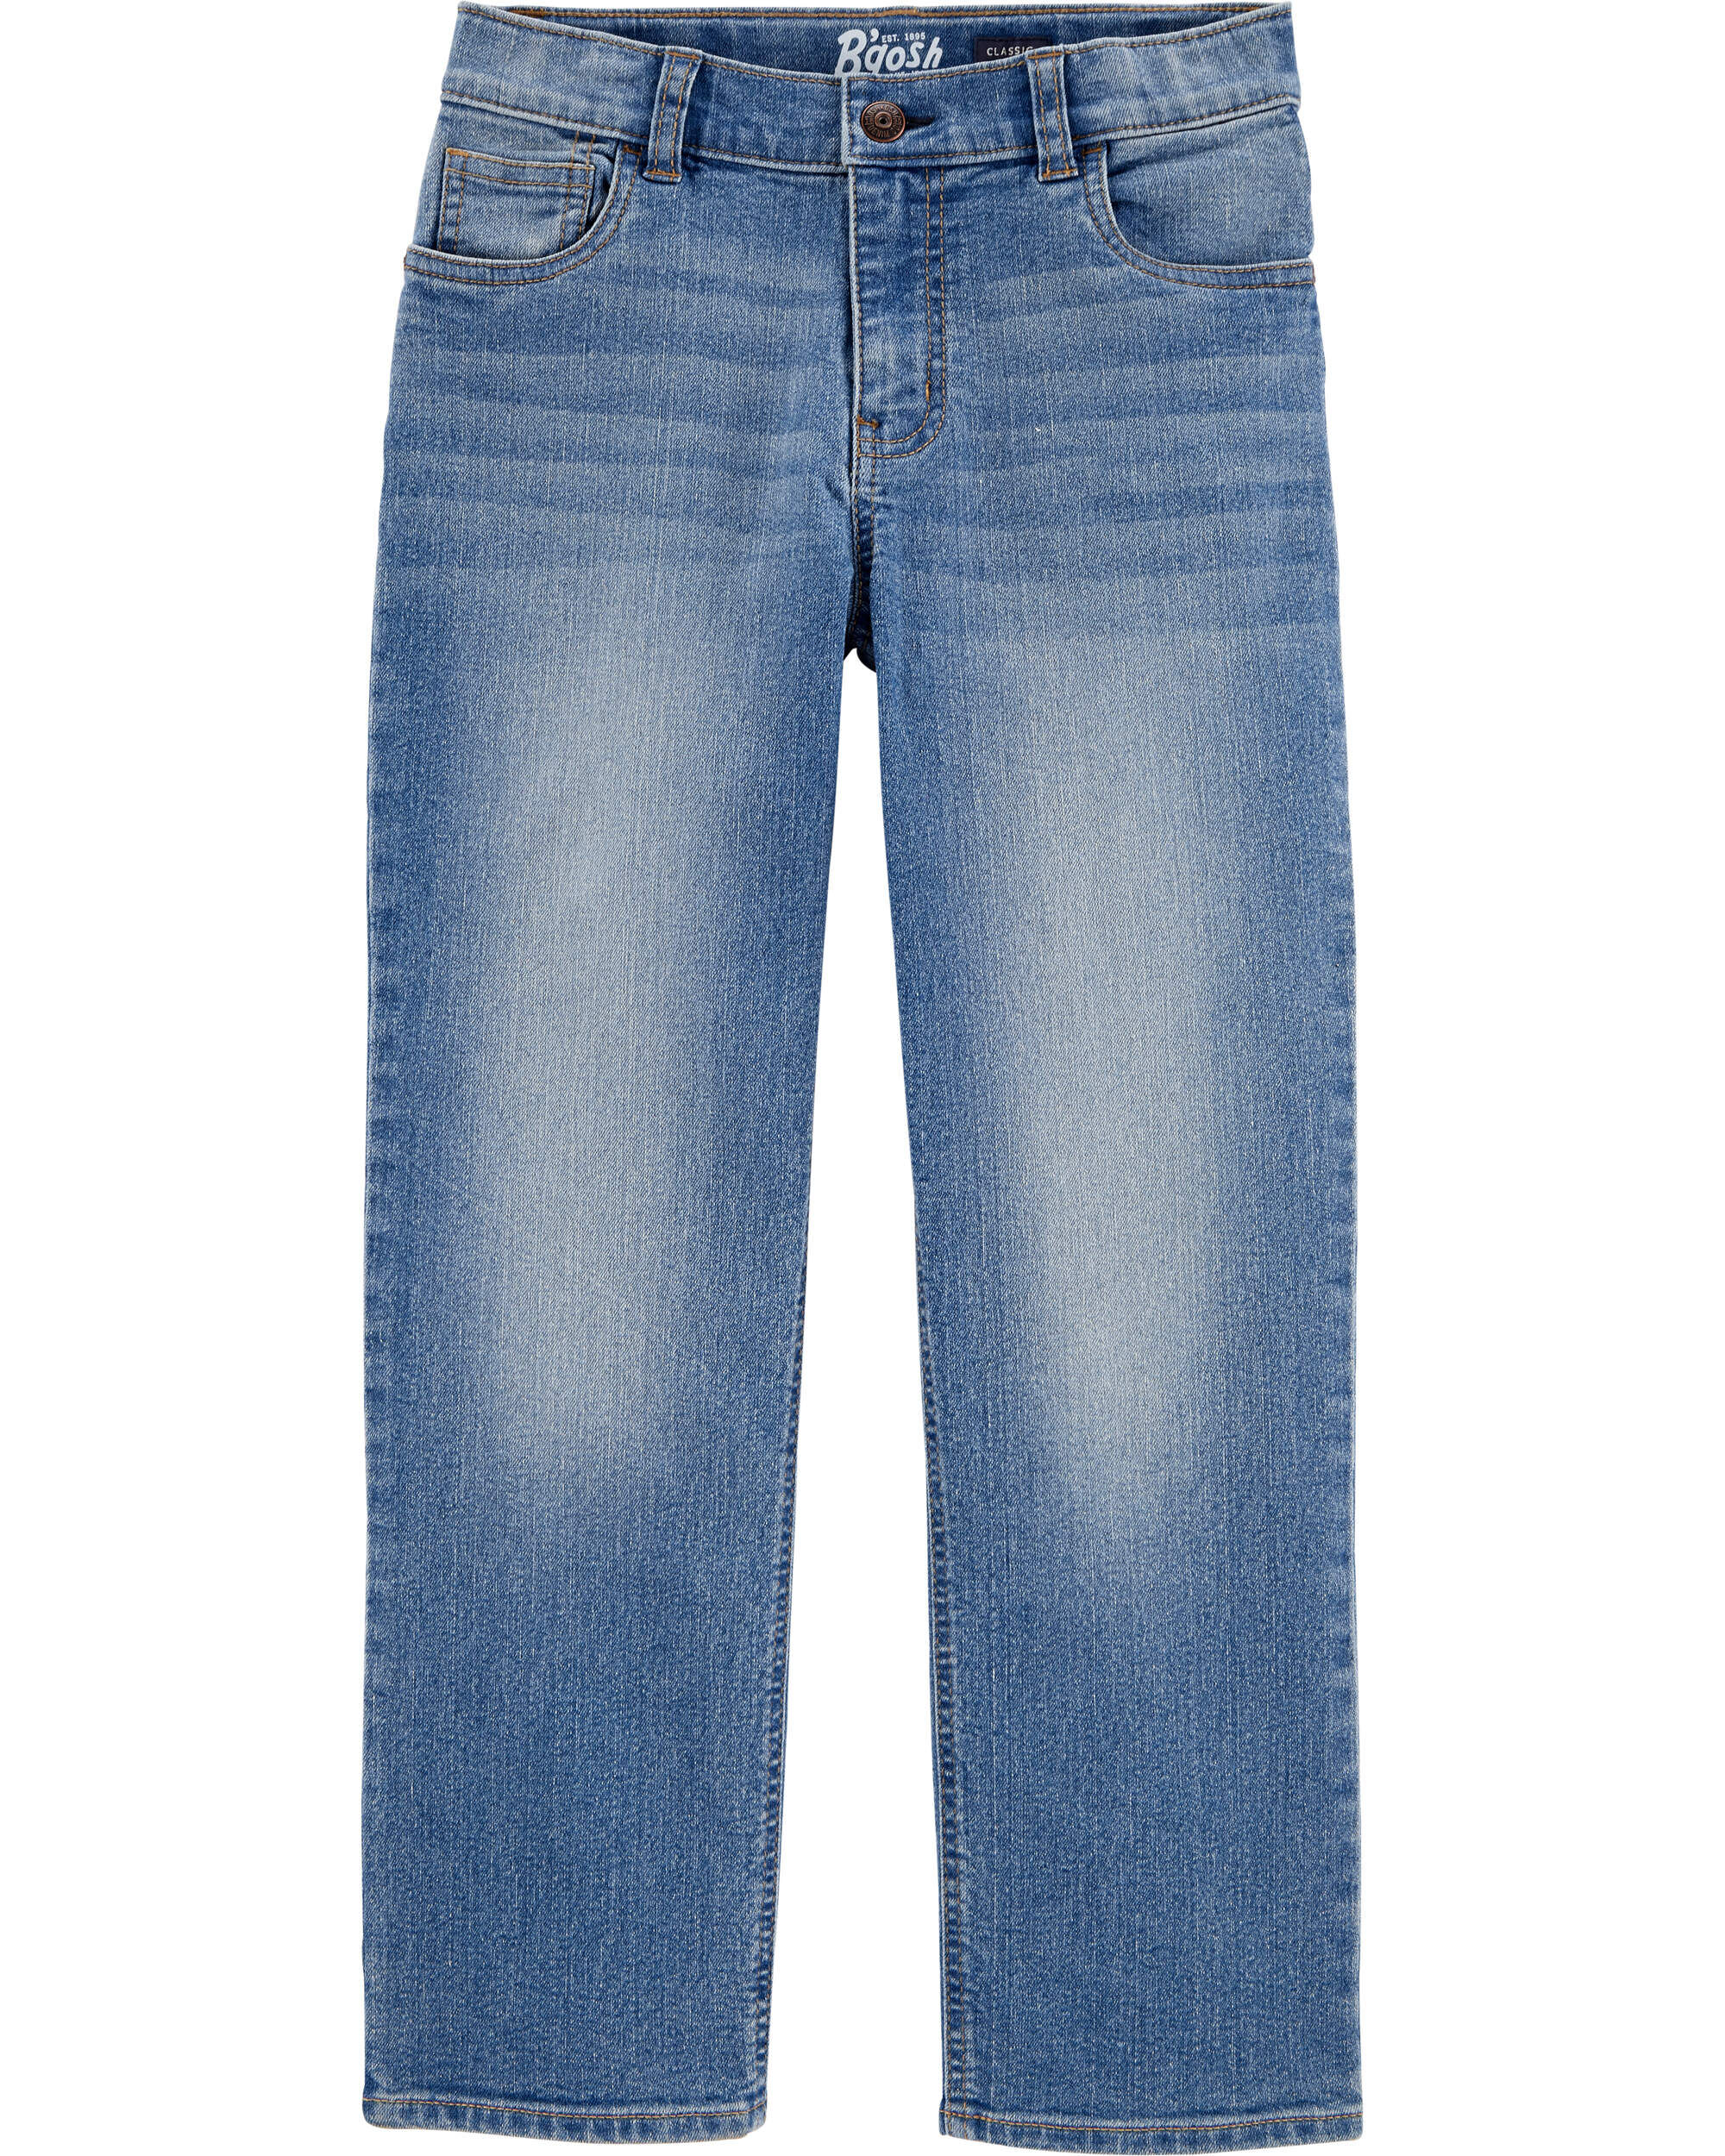 Kid Medium Wash Relaxed-Fit Classic Jeans Carter's